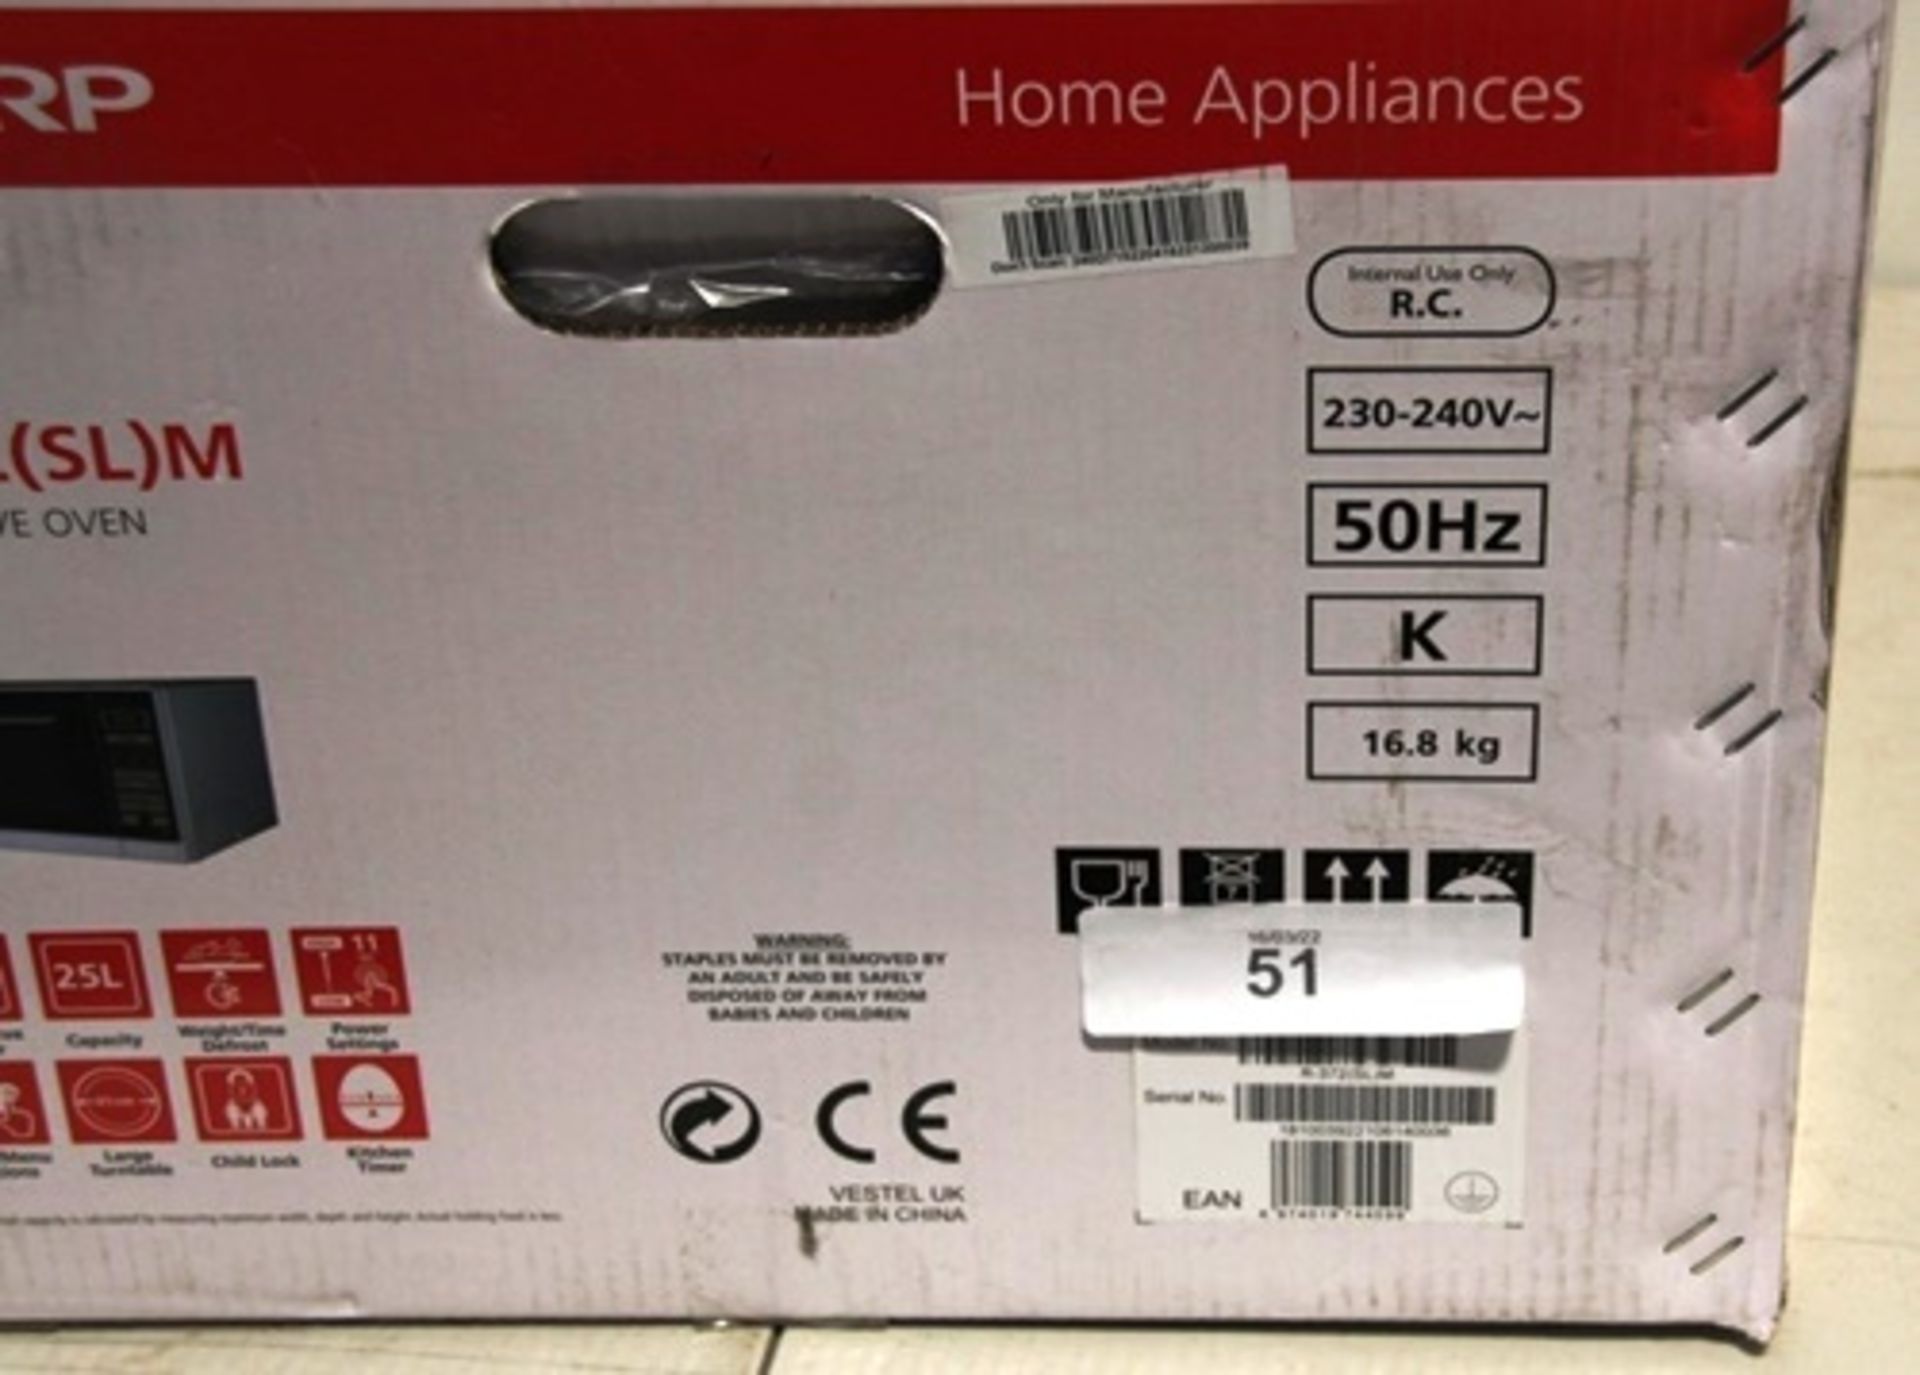 1 x Sharp R-372SLM microwave oven - Sealed new in box (ES1) - Image 2 of 2